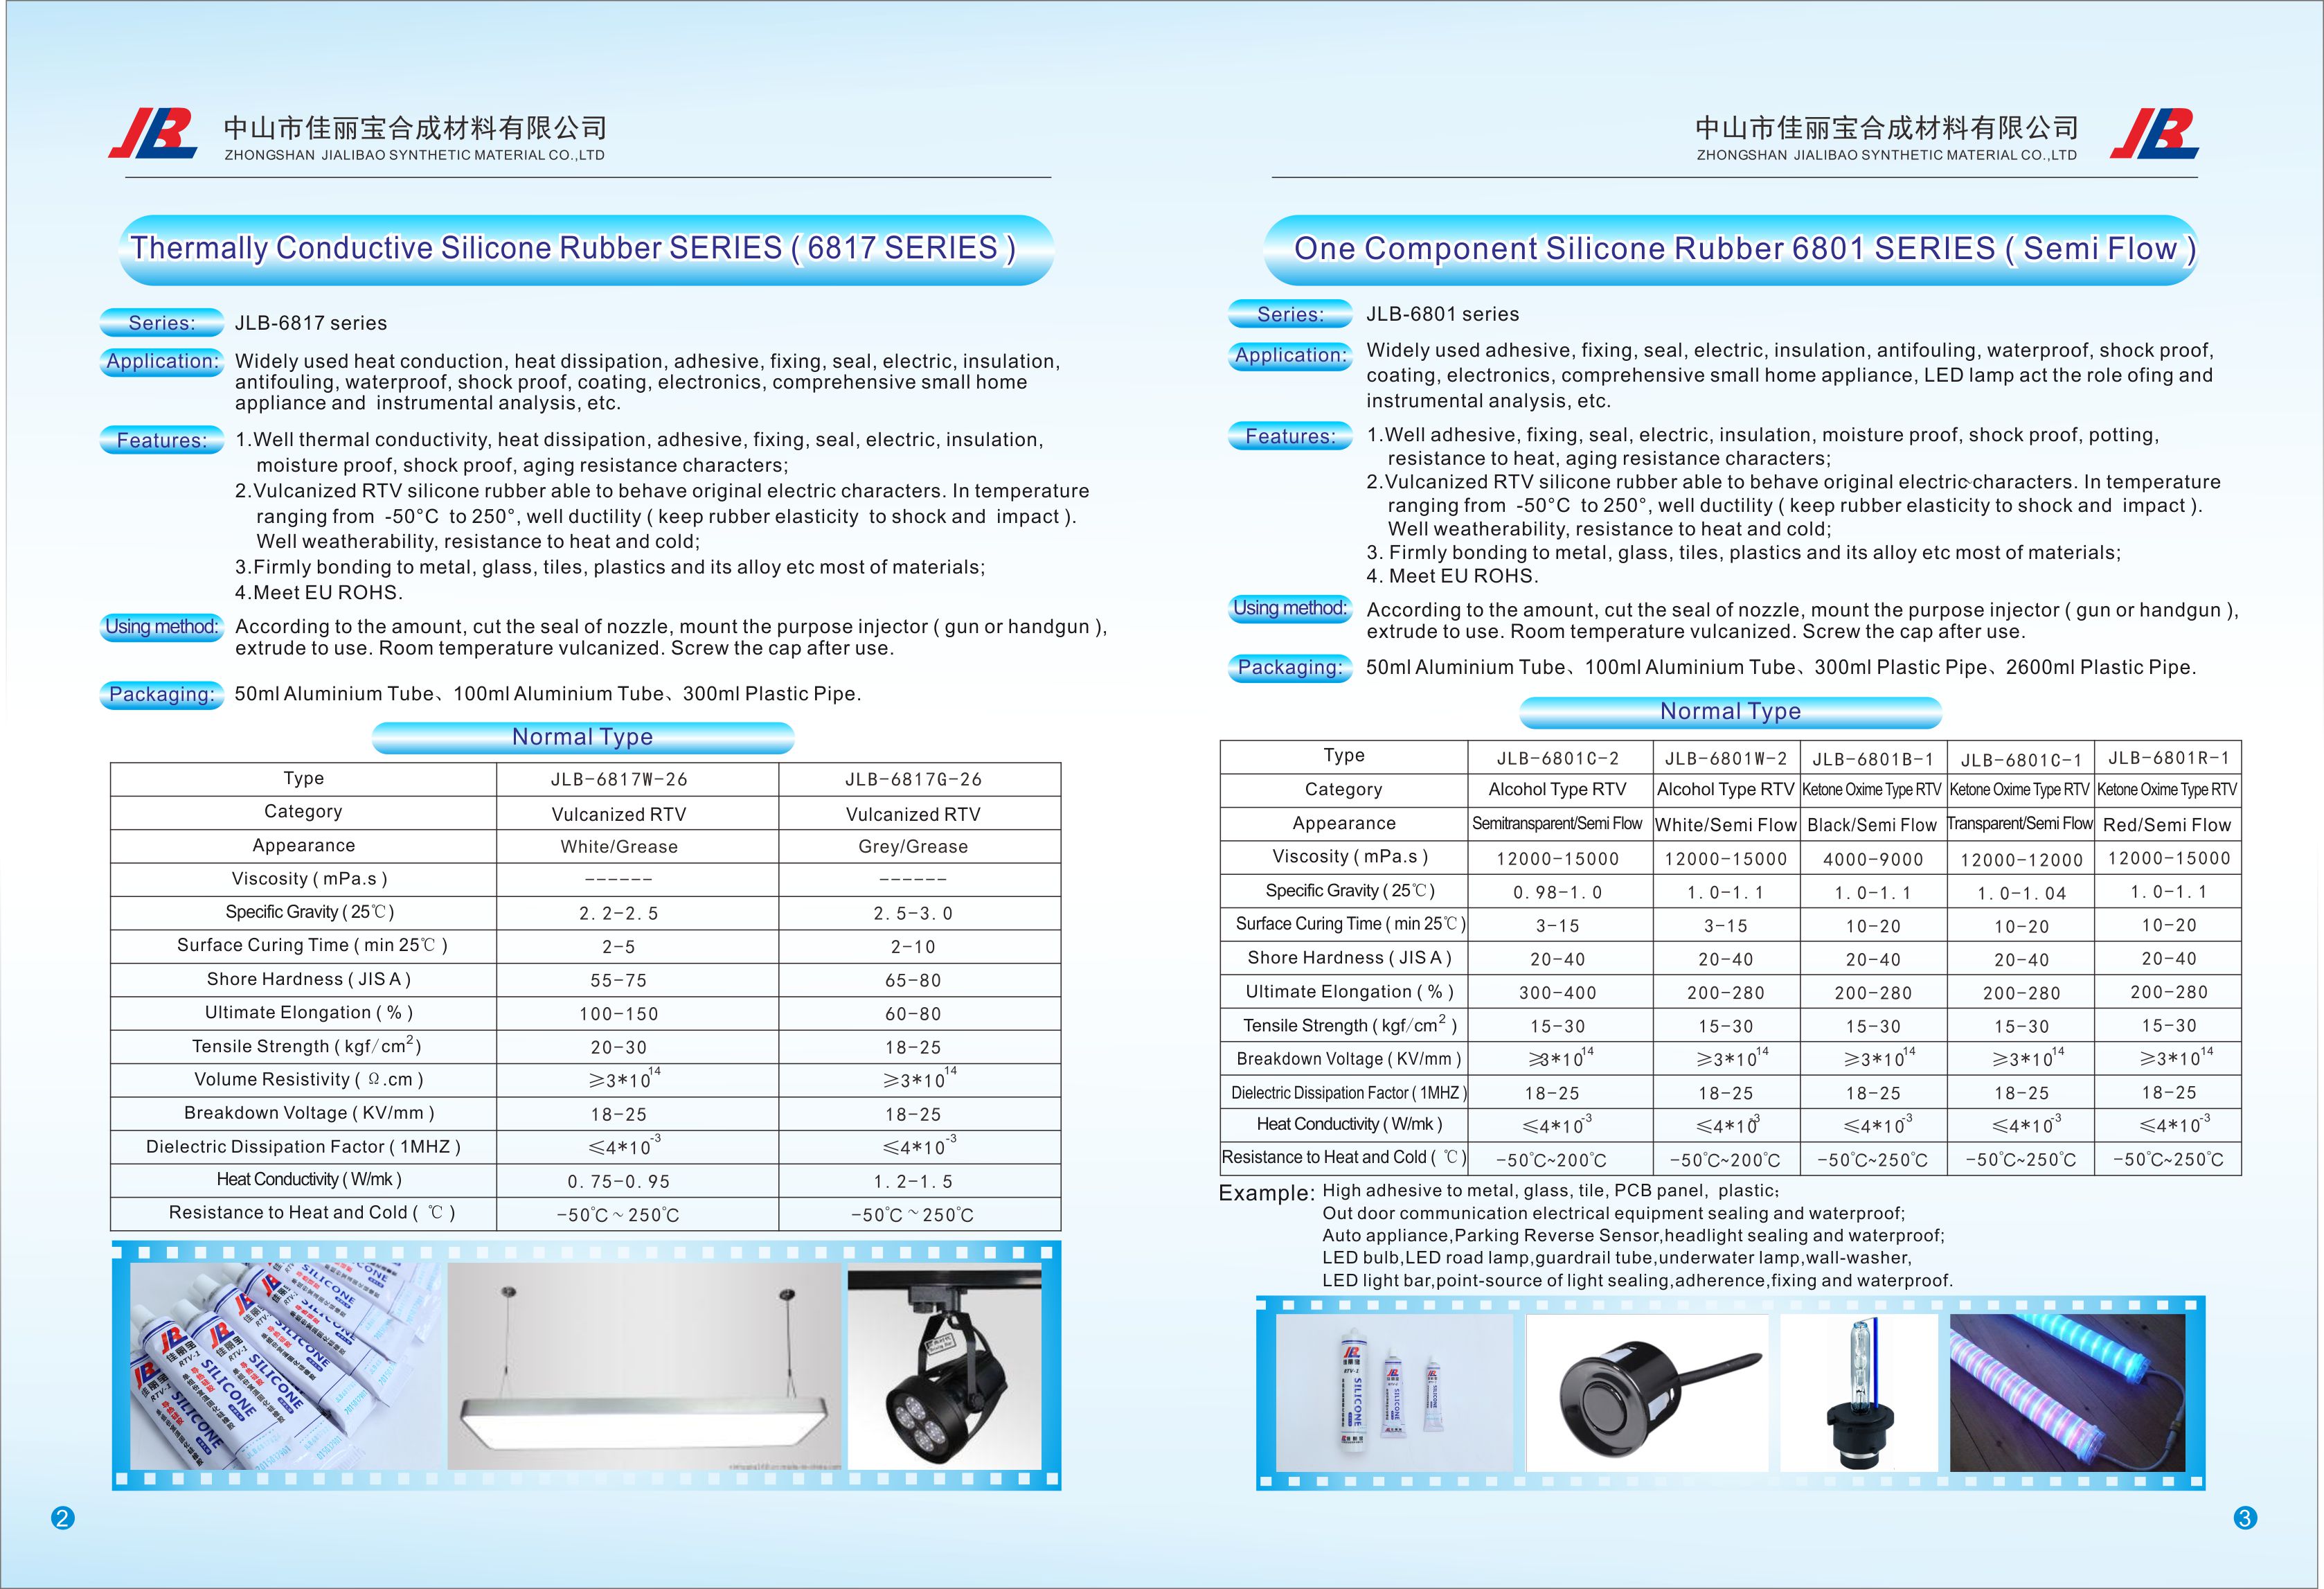 One Component Silicone Rubber 6801 Series